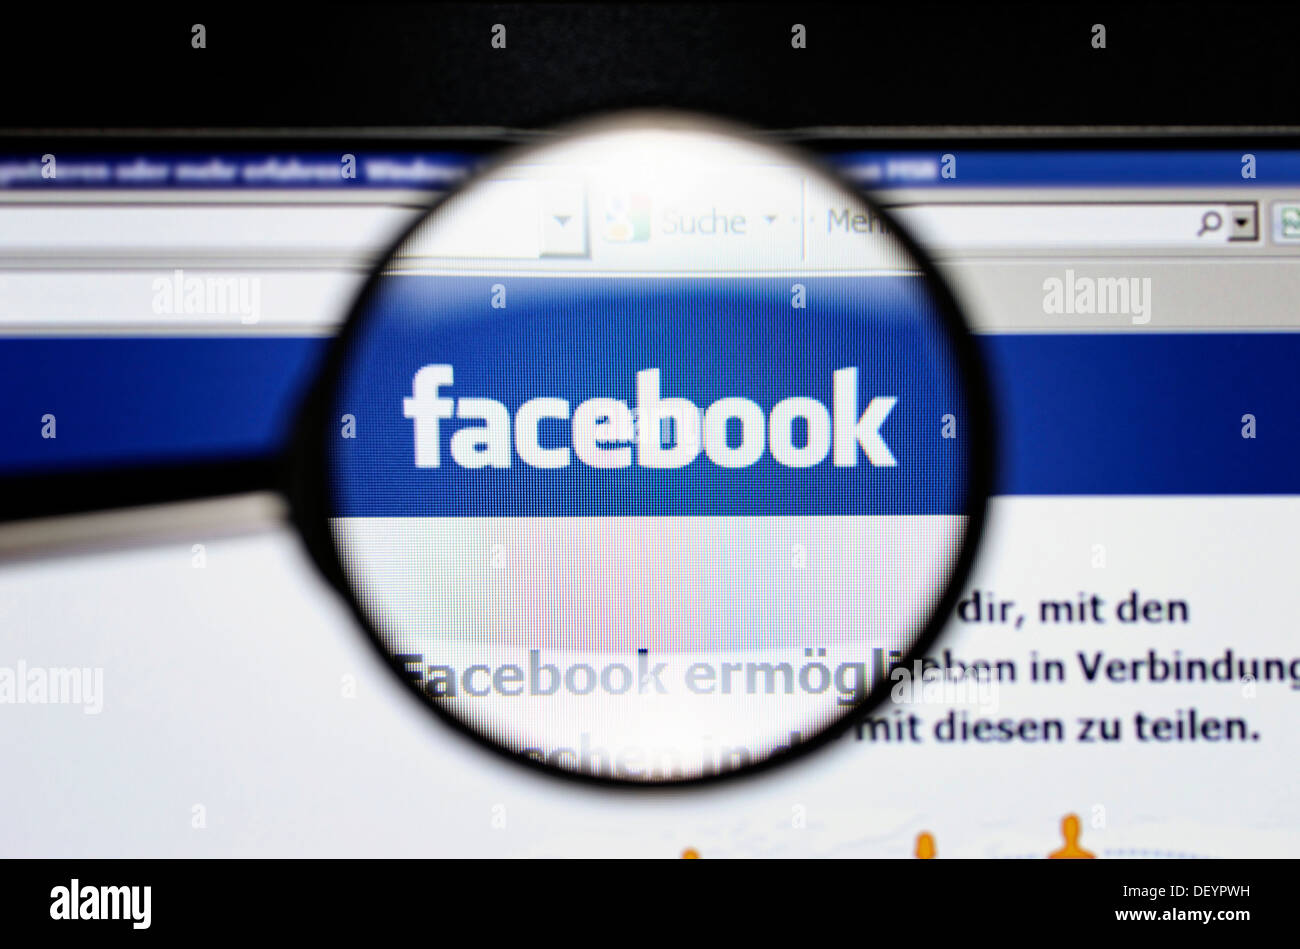 Social networking site Facebook under a magnifying glass, symbolic image Stock Photo